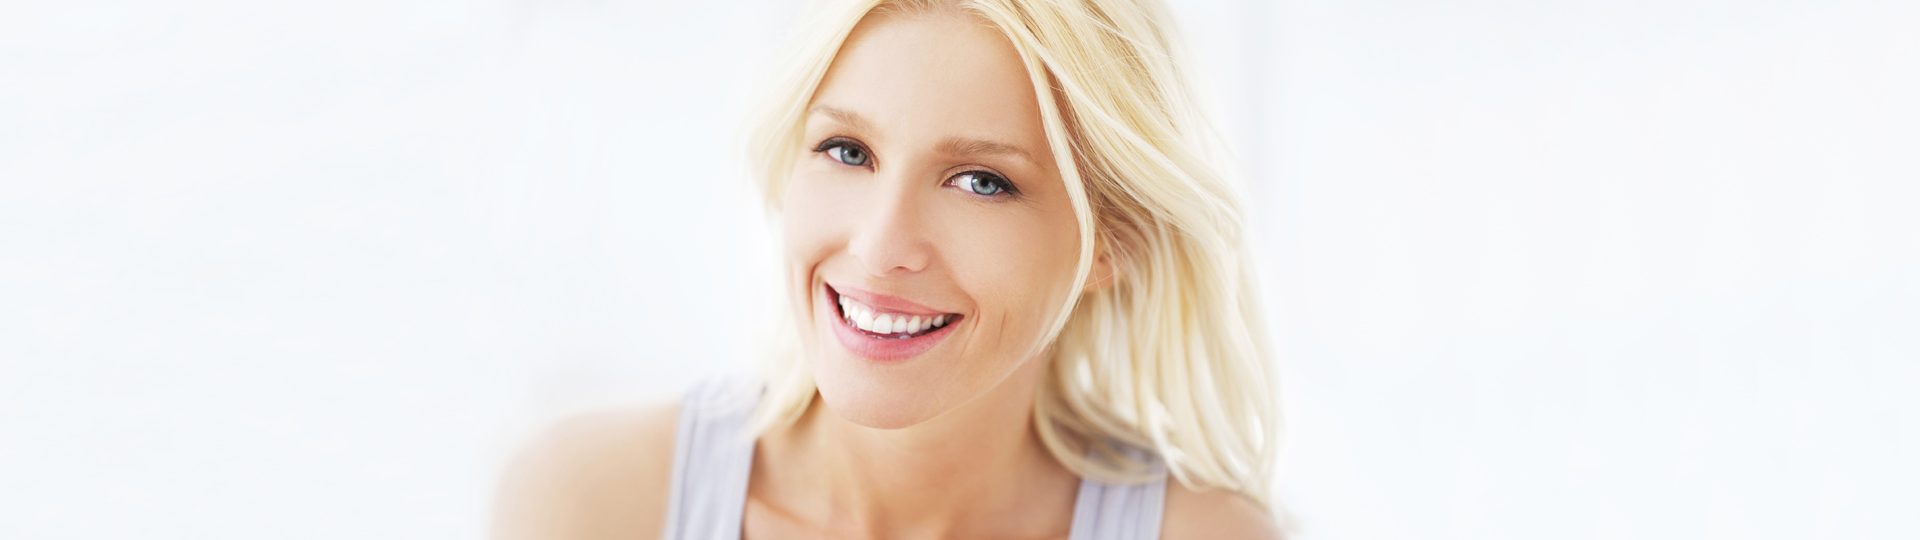 Beautify Your Smile With Teeth Whitening